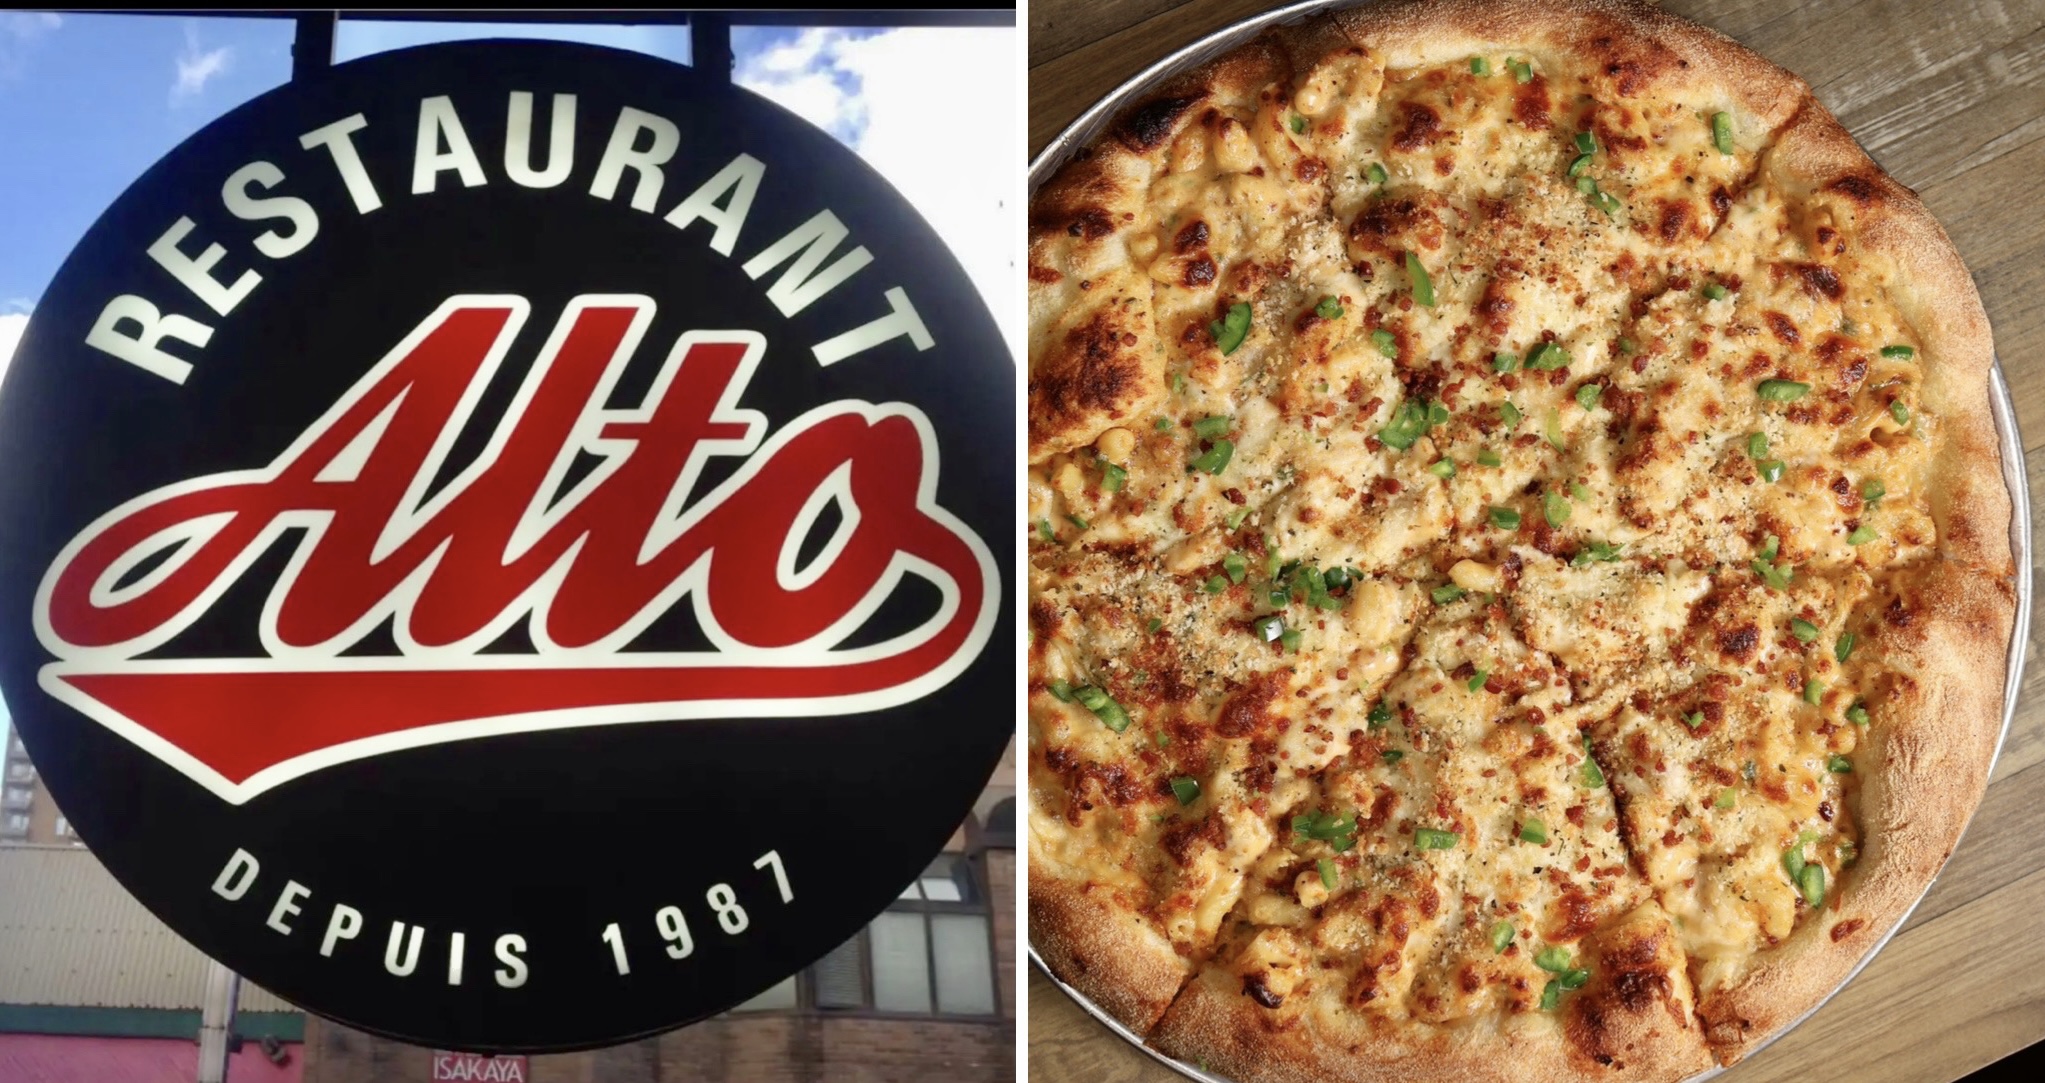 ‘The MACattack’ from Montreal restaurant Alto was named the best pizza in Canada